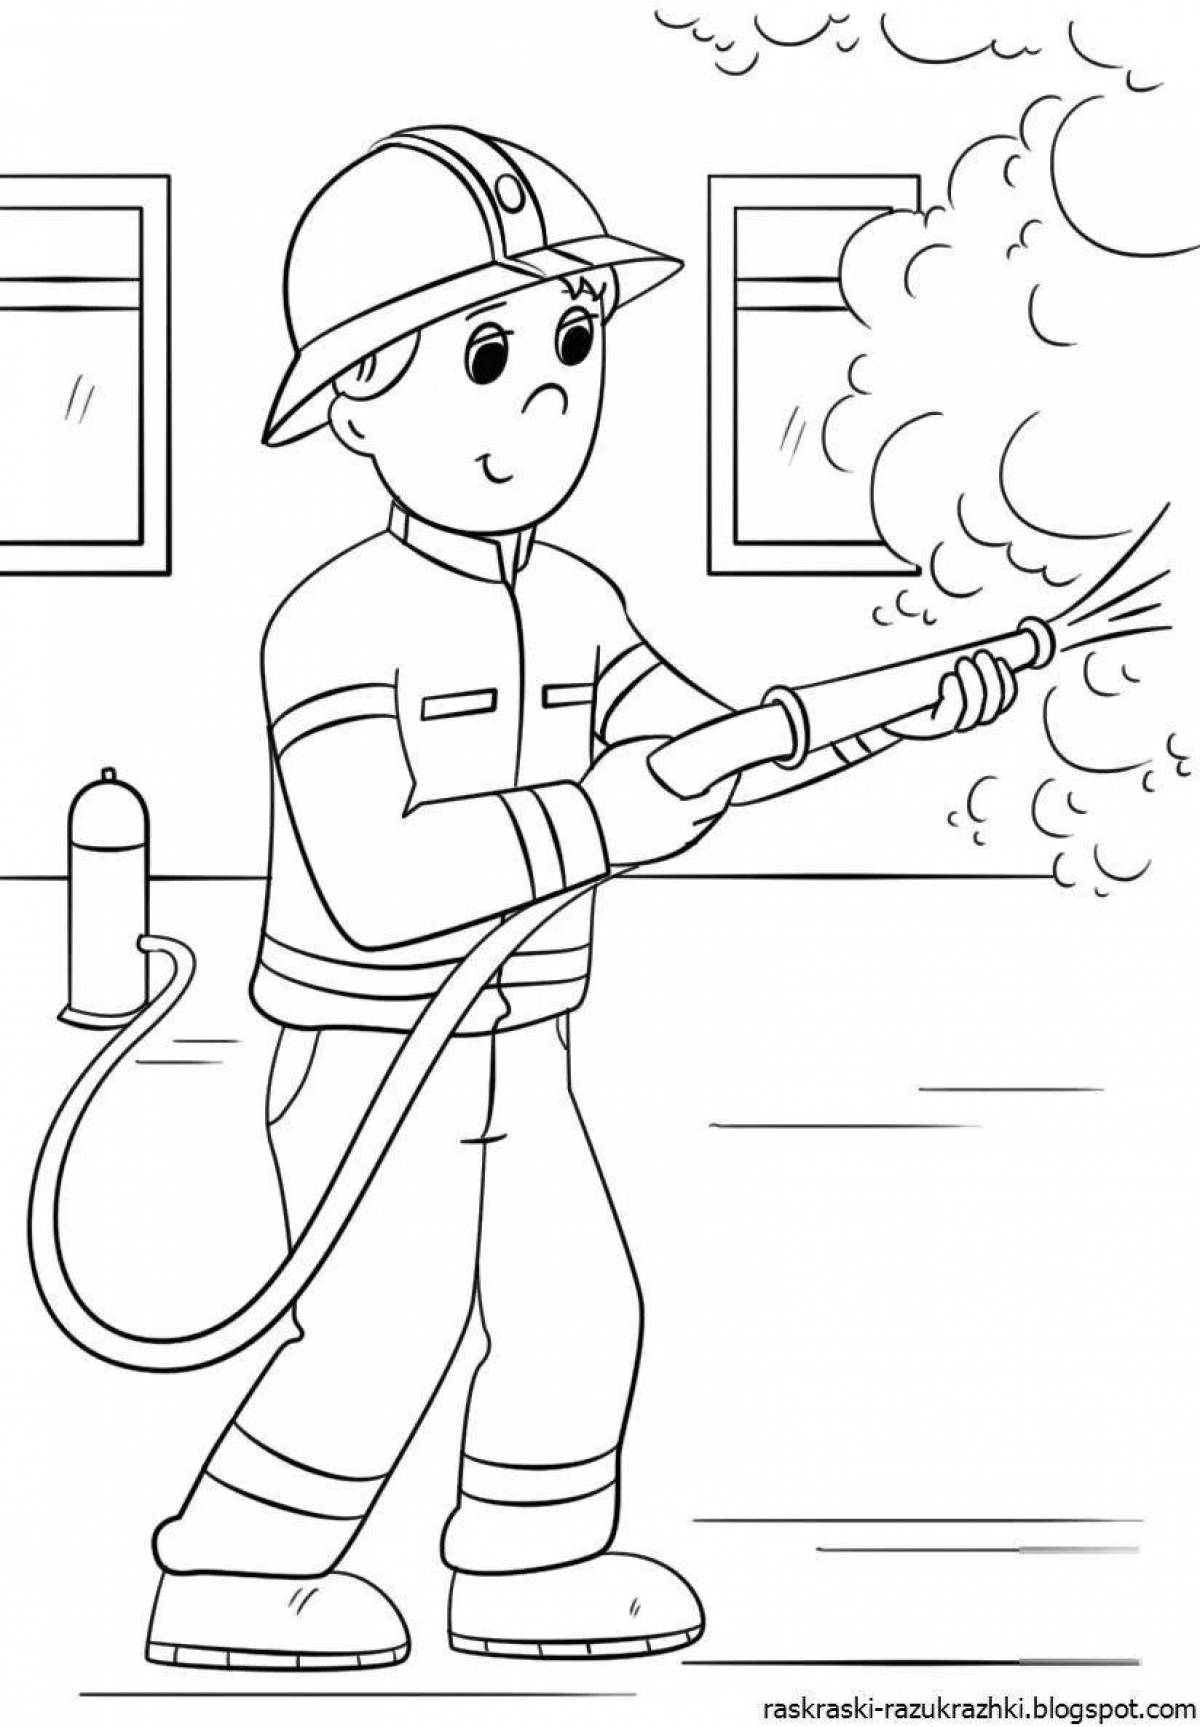 Fire safety inspirational coloring book for kindergarten